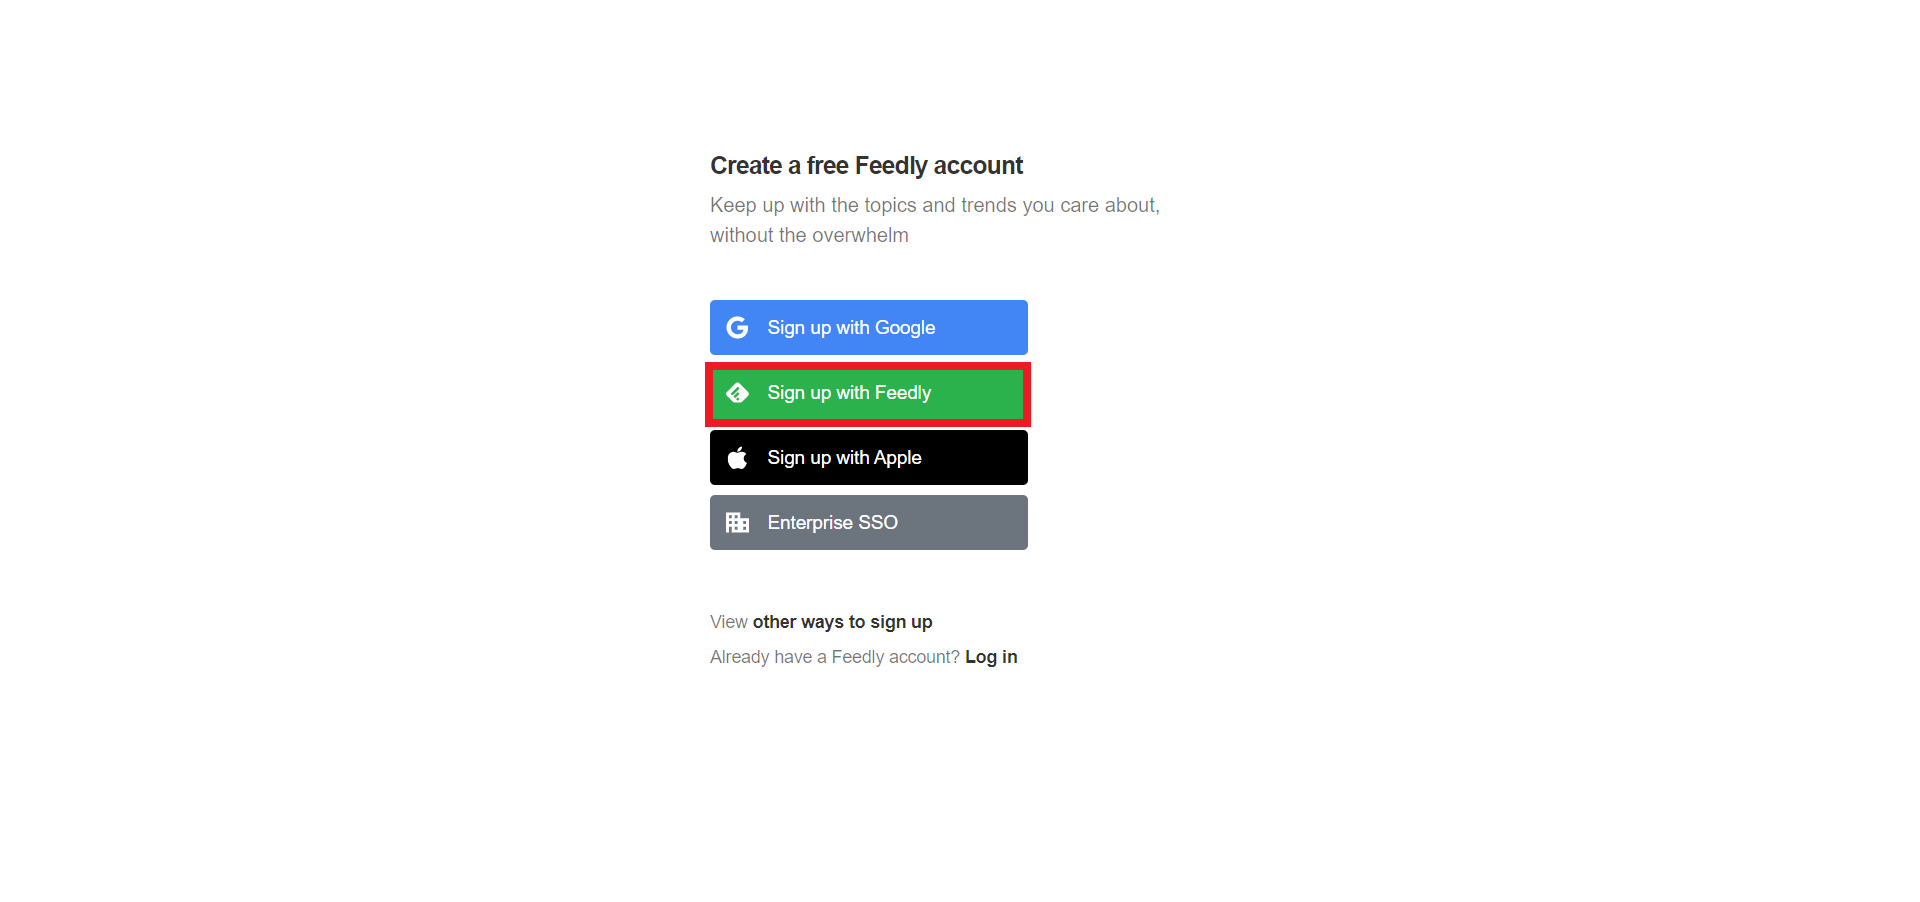 Sign up with Feedly